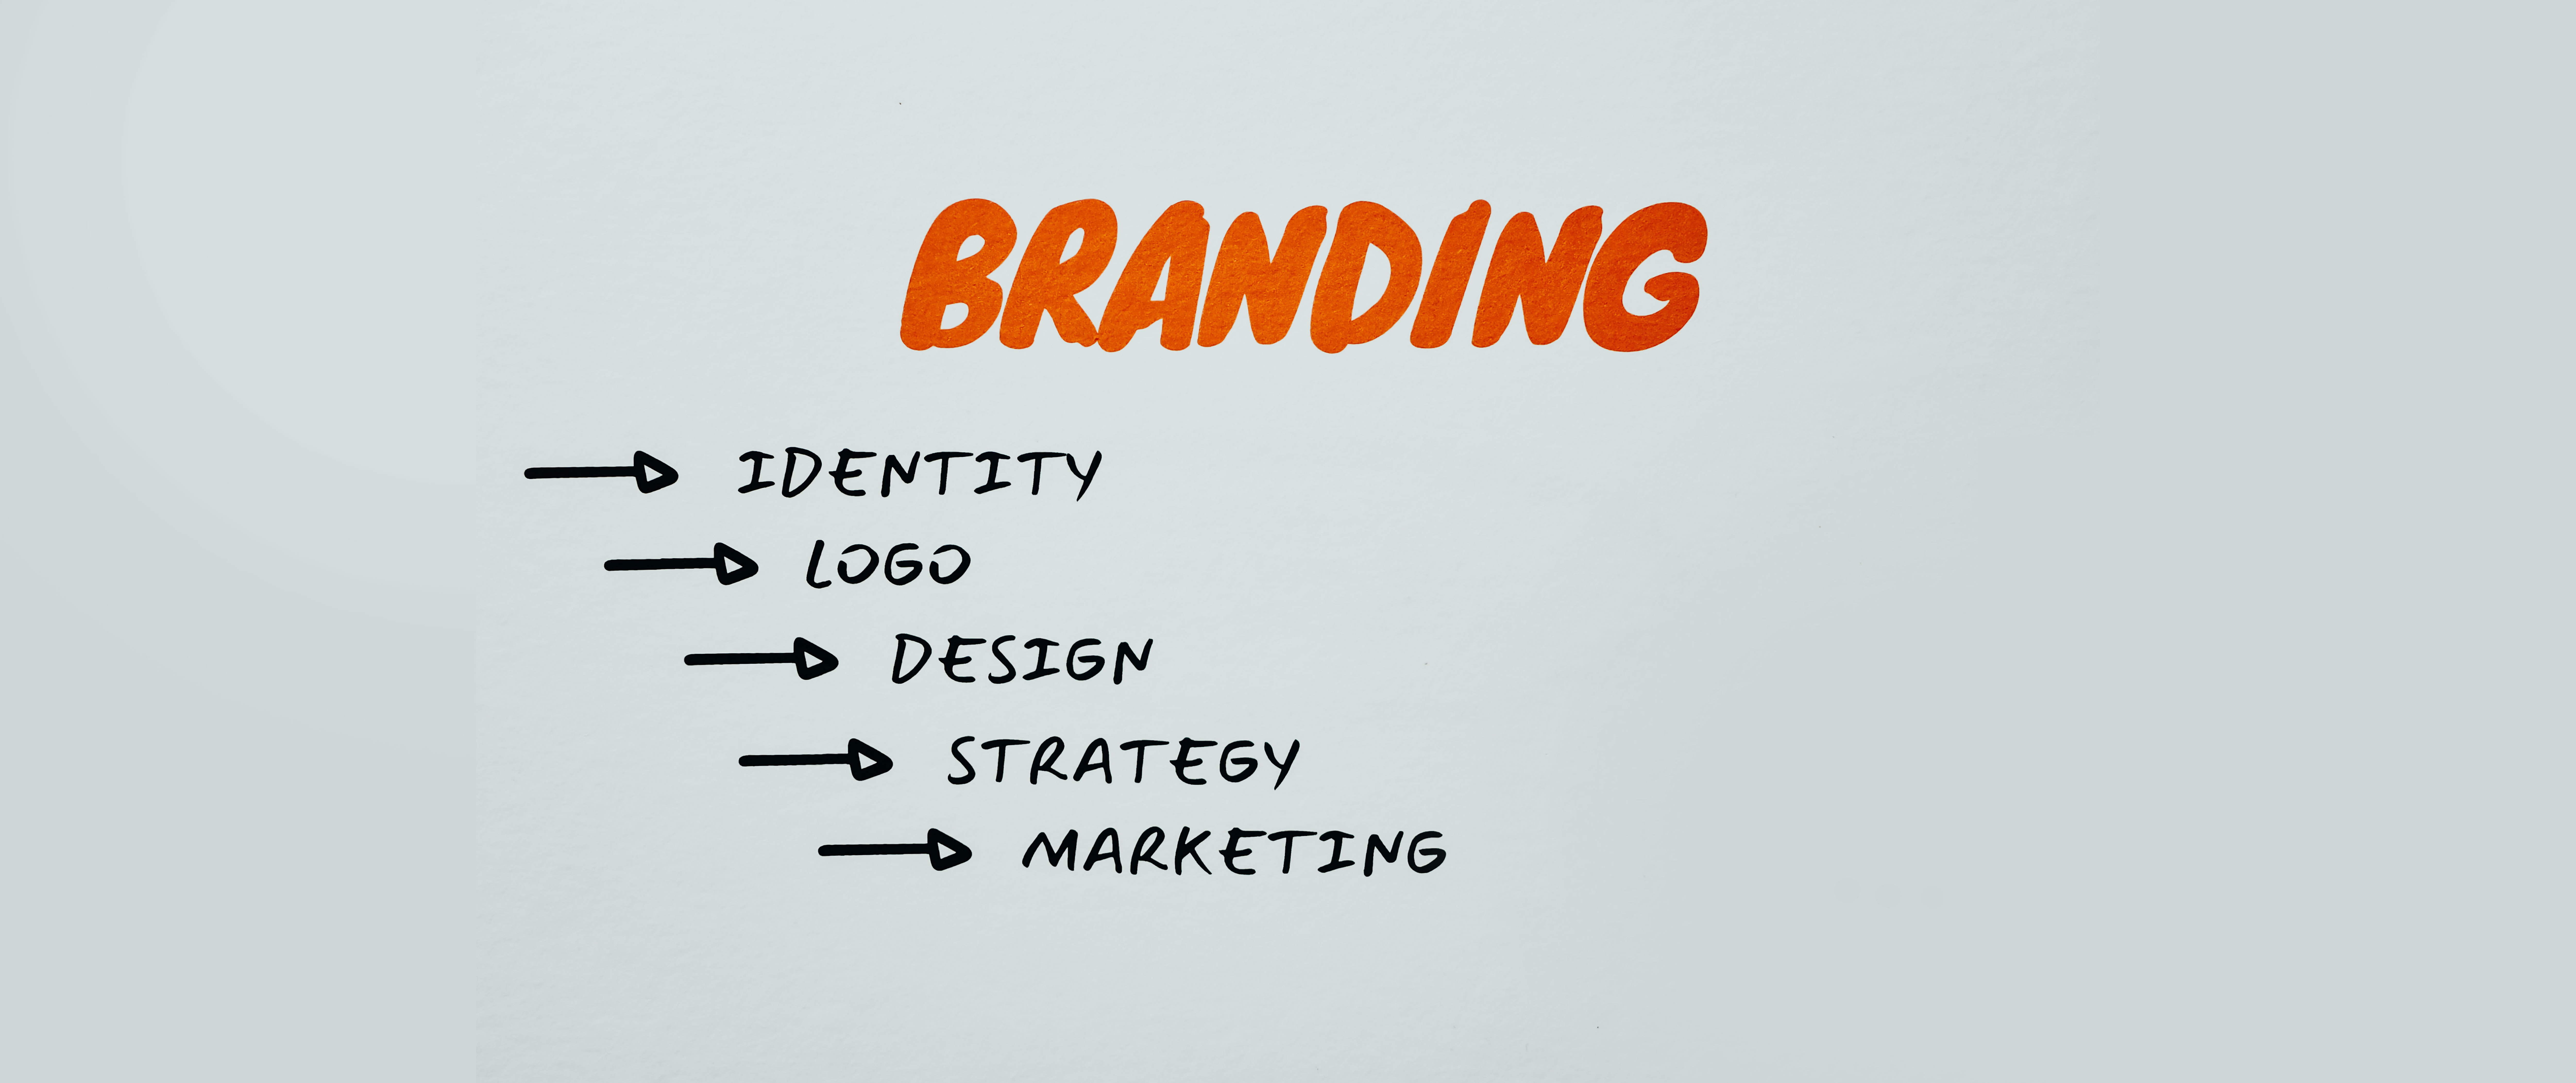 Why branding is important for your business?